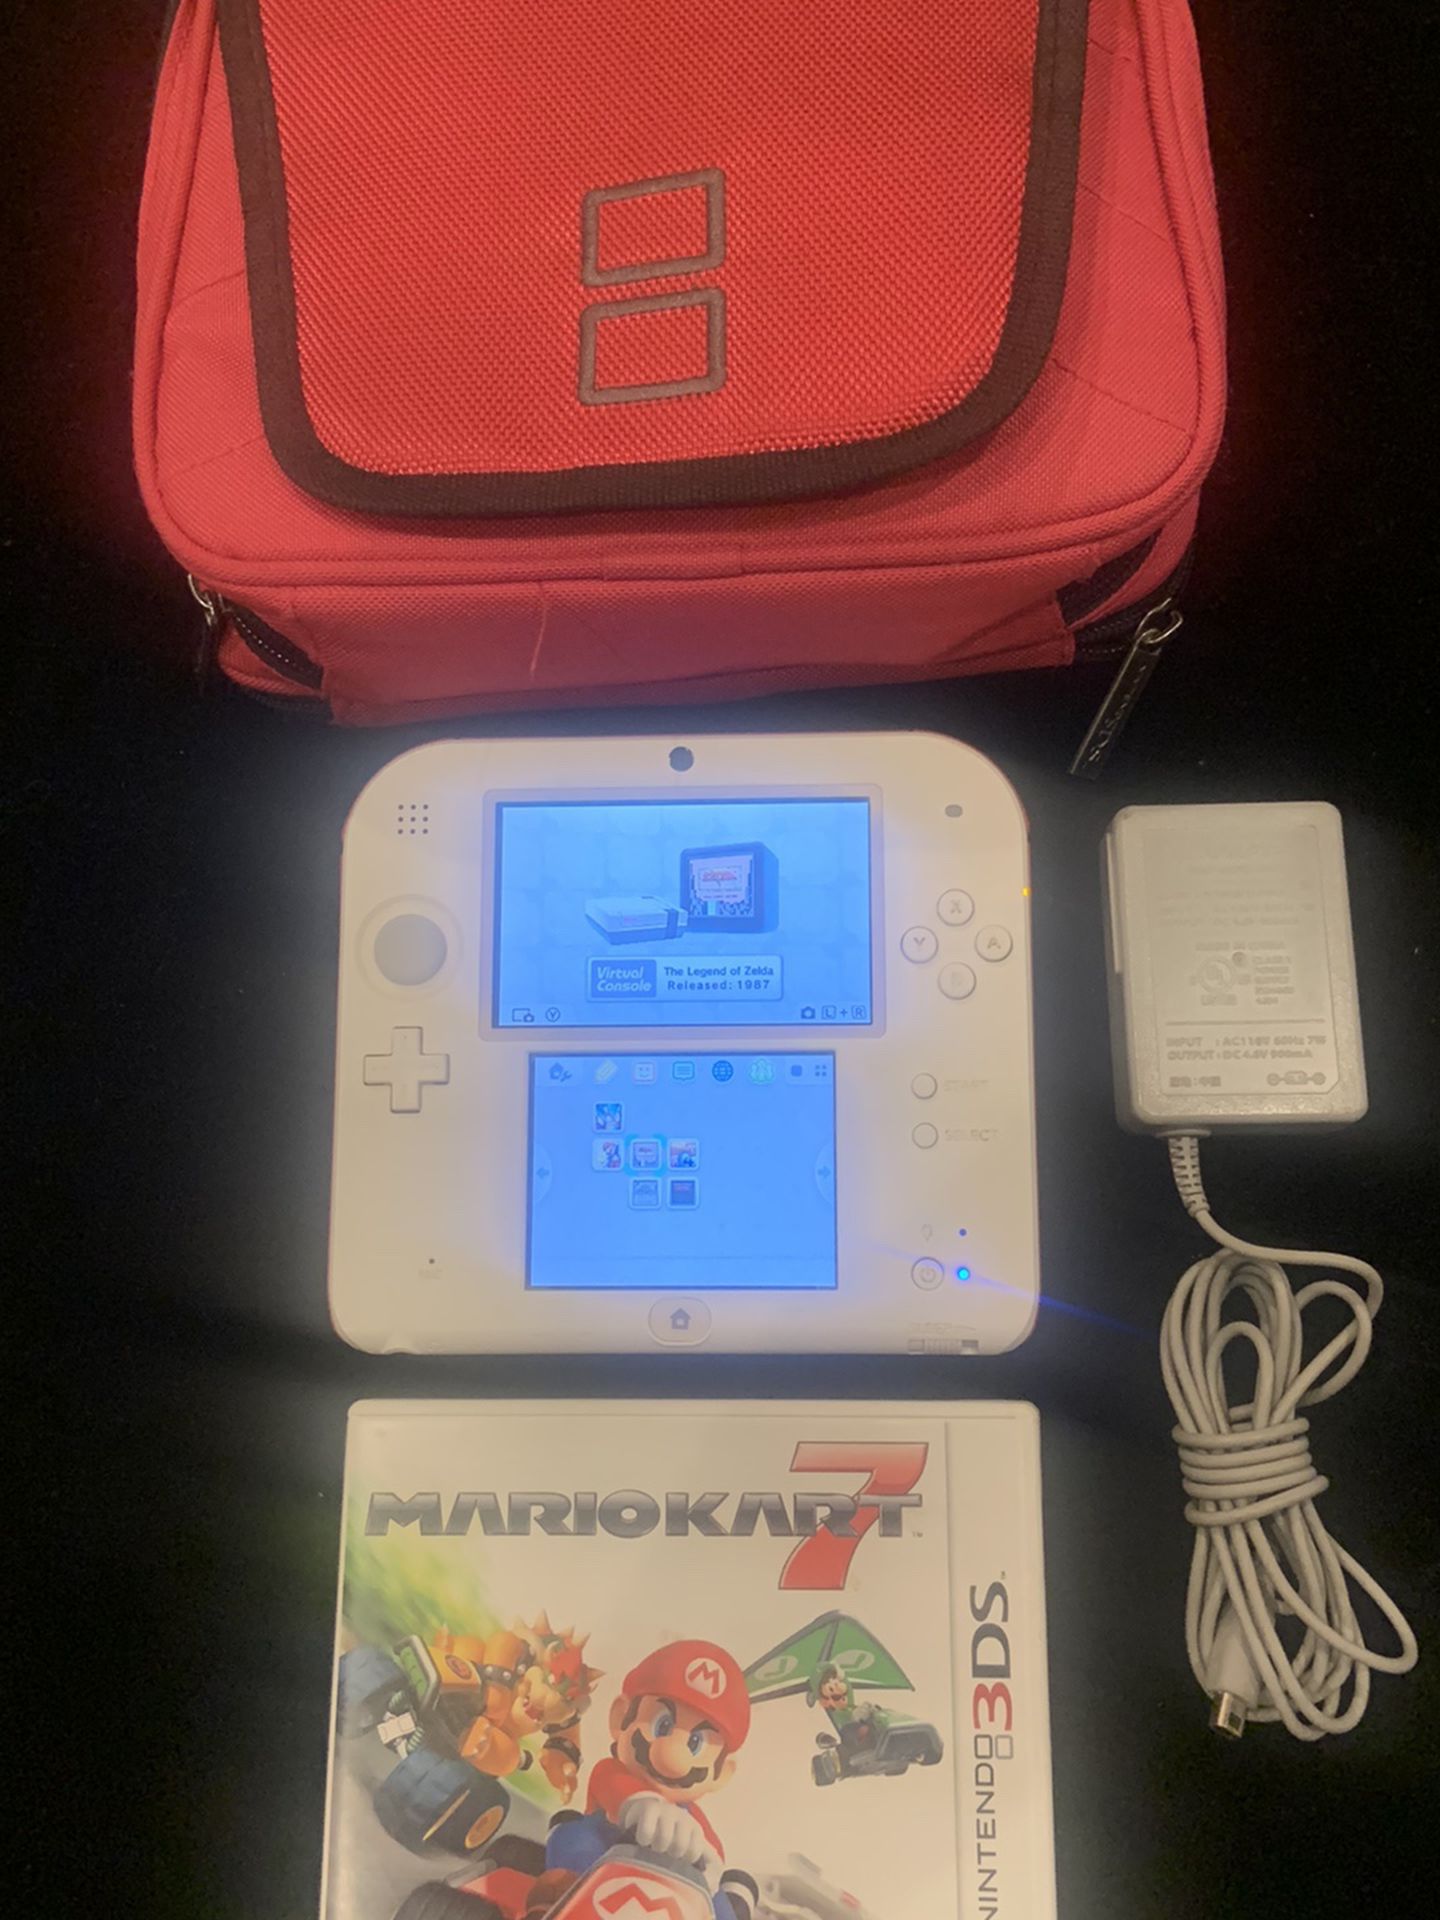 Nintendo 2DS White/Red Handheld + 20 Games(19 Pre-Installed)+ Charger +Game Bag